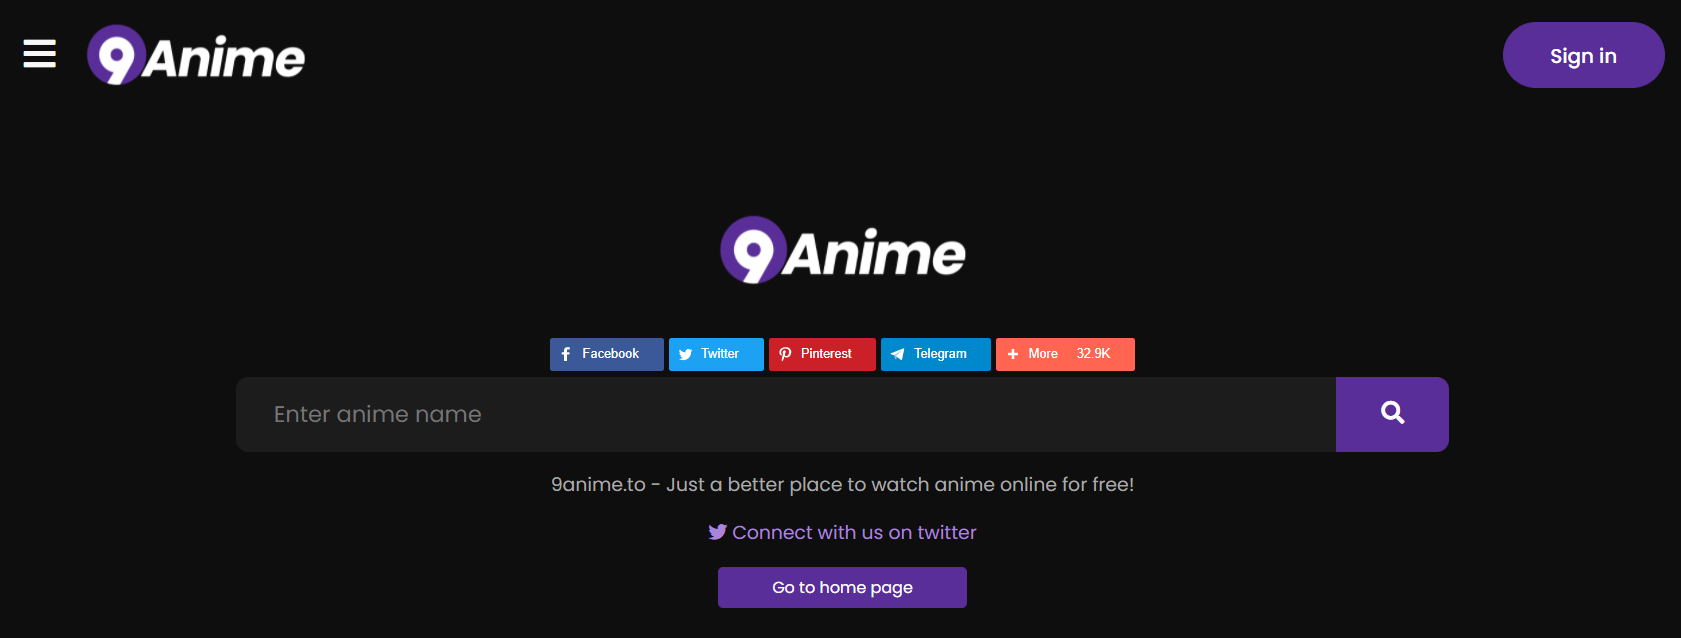 9anime website. Is it safe to use for watching anime?